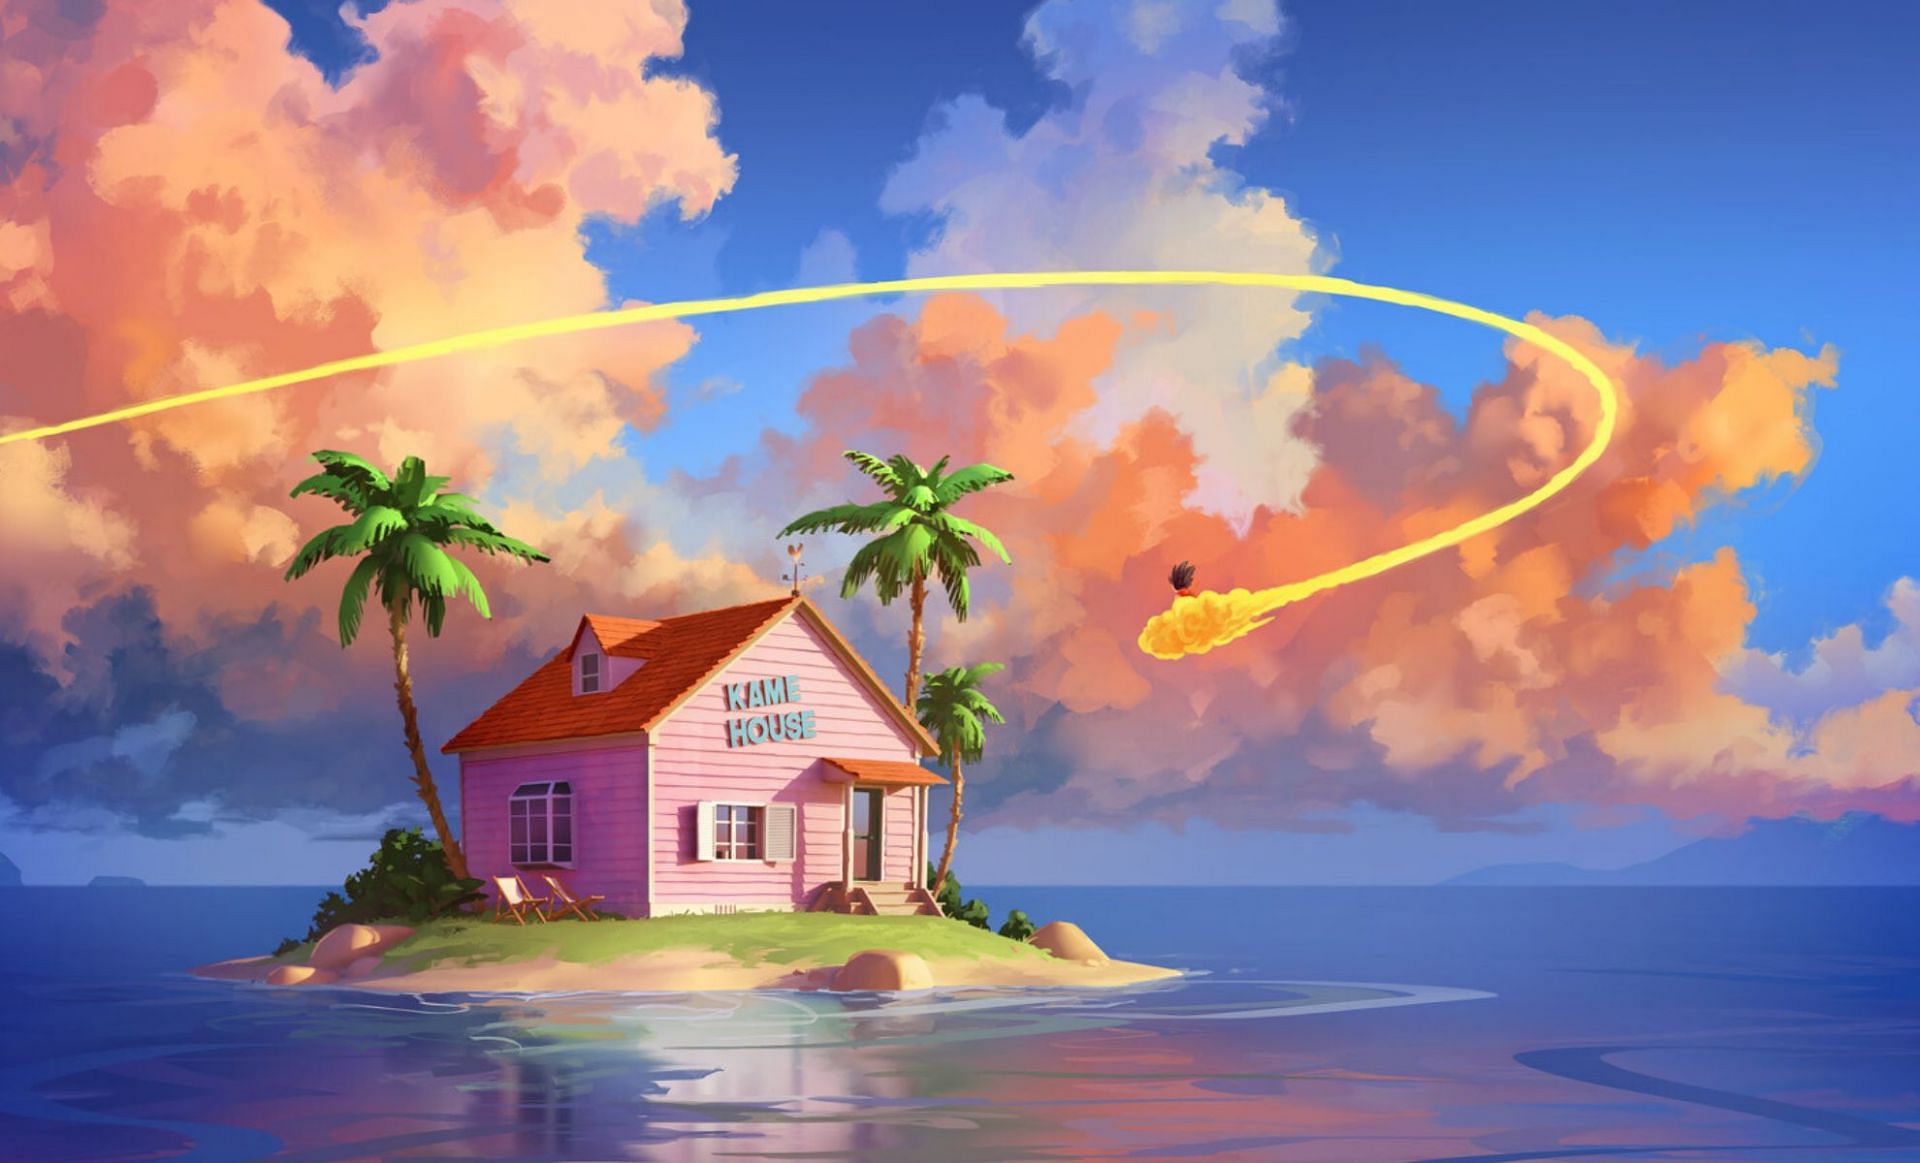 Fortnite leak shows Kame House from Dragon Ball as potential new POI